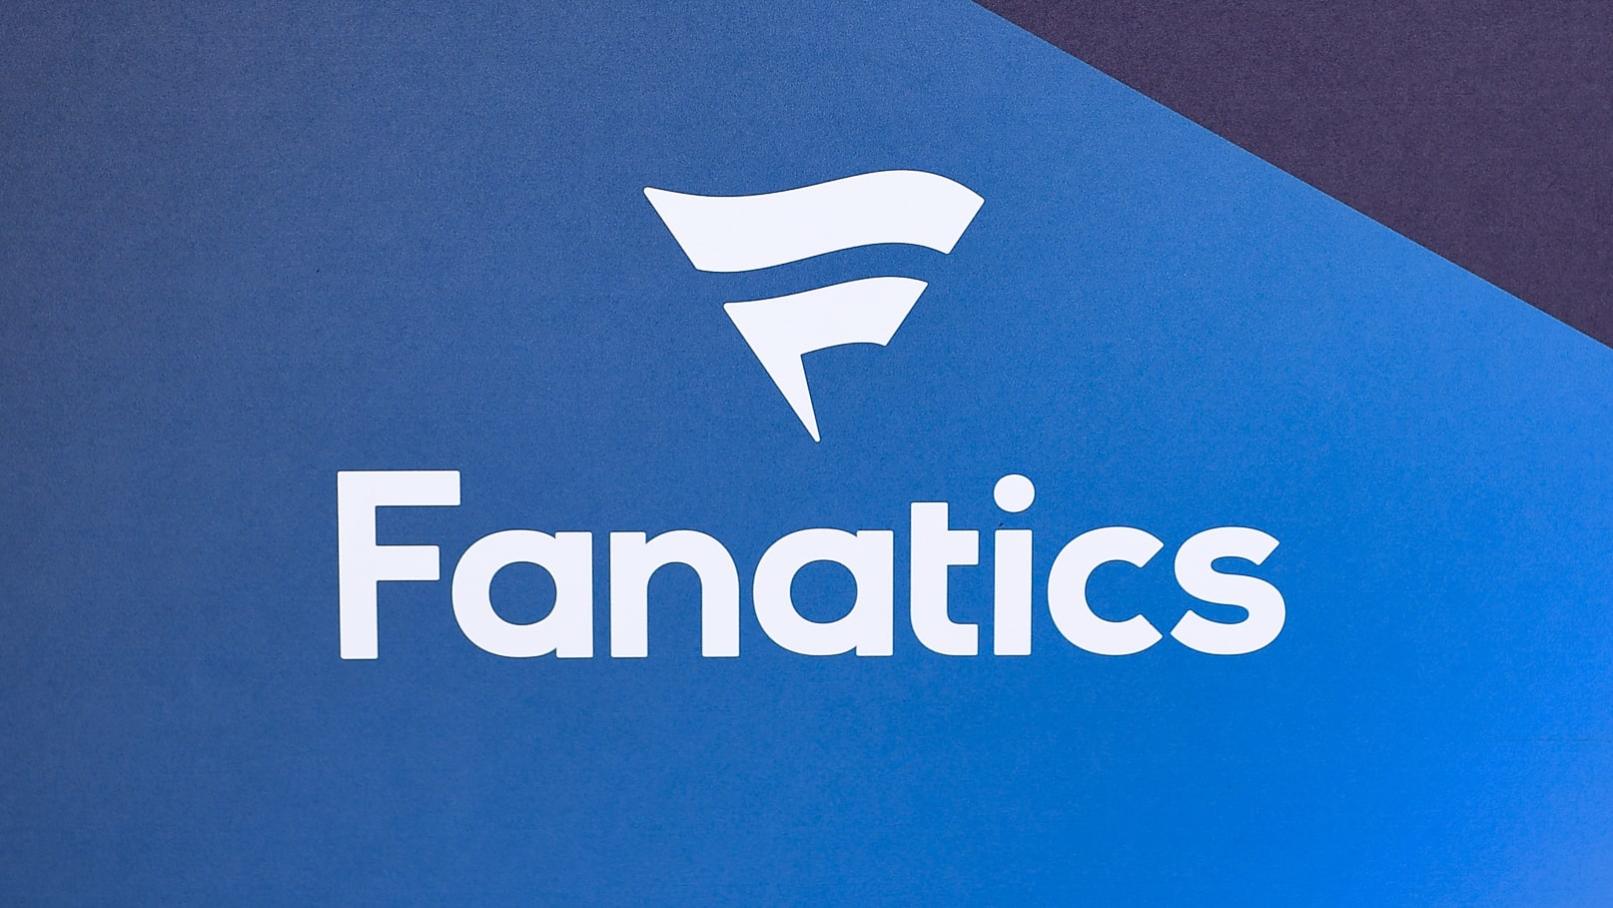 Fanatics agrees to purchase PointsBet US betting business